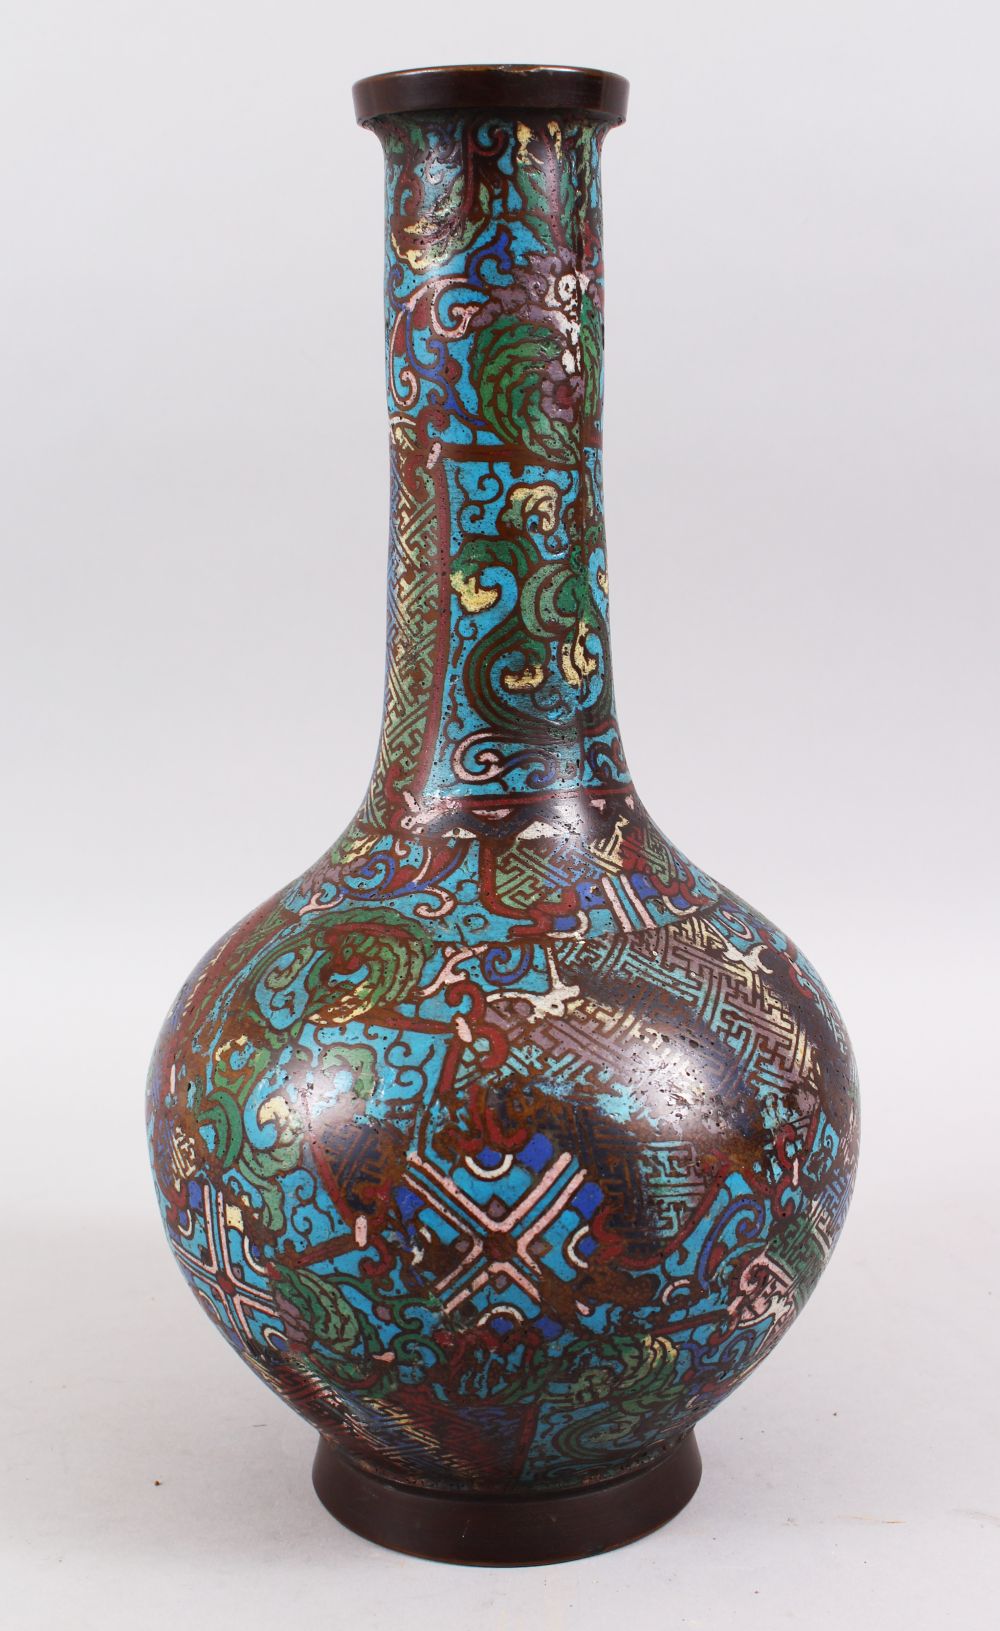 A GOOD CHINESE MING STYLE CLOISONNE BOTTLE VASE, The body decorated in geometric design, the base